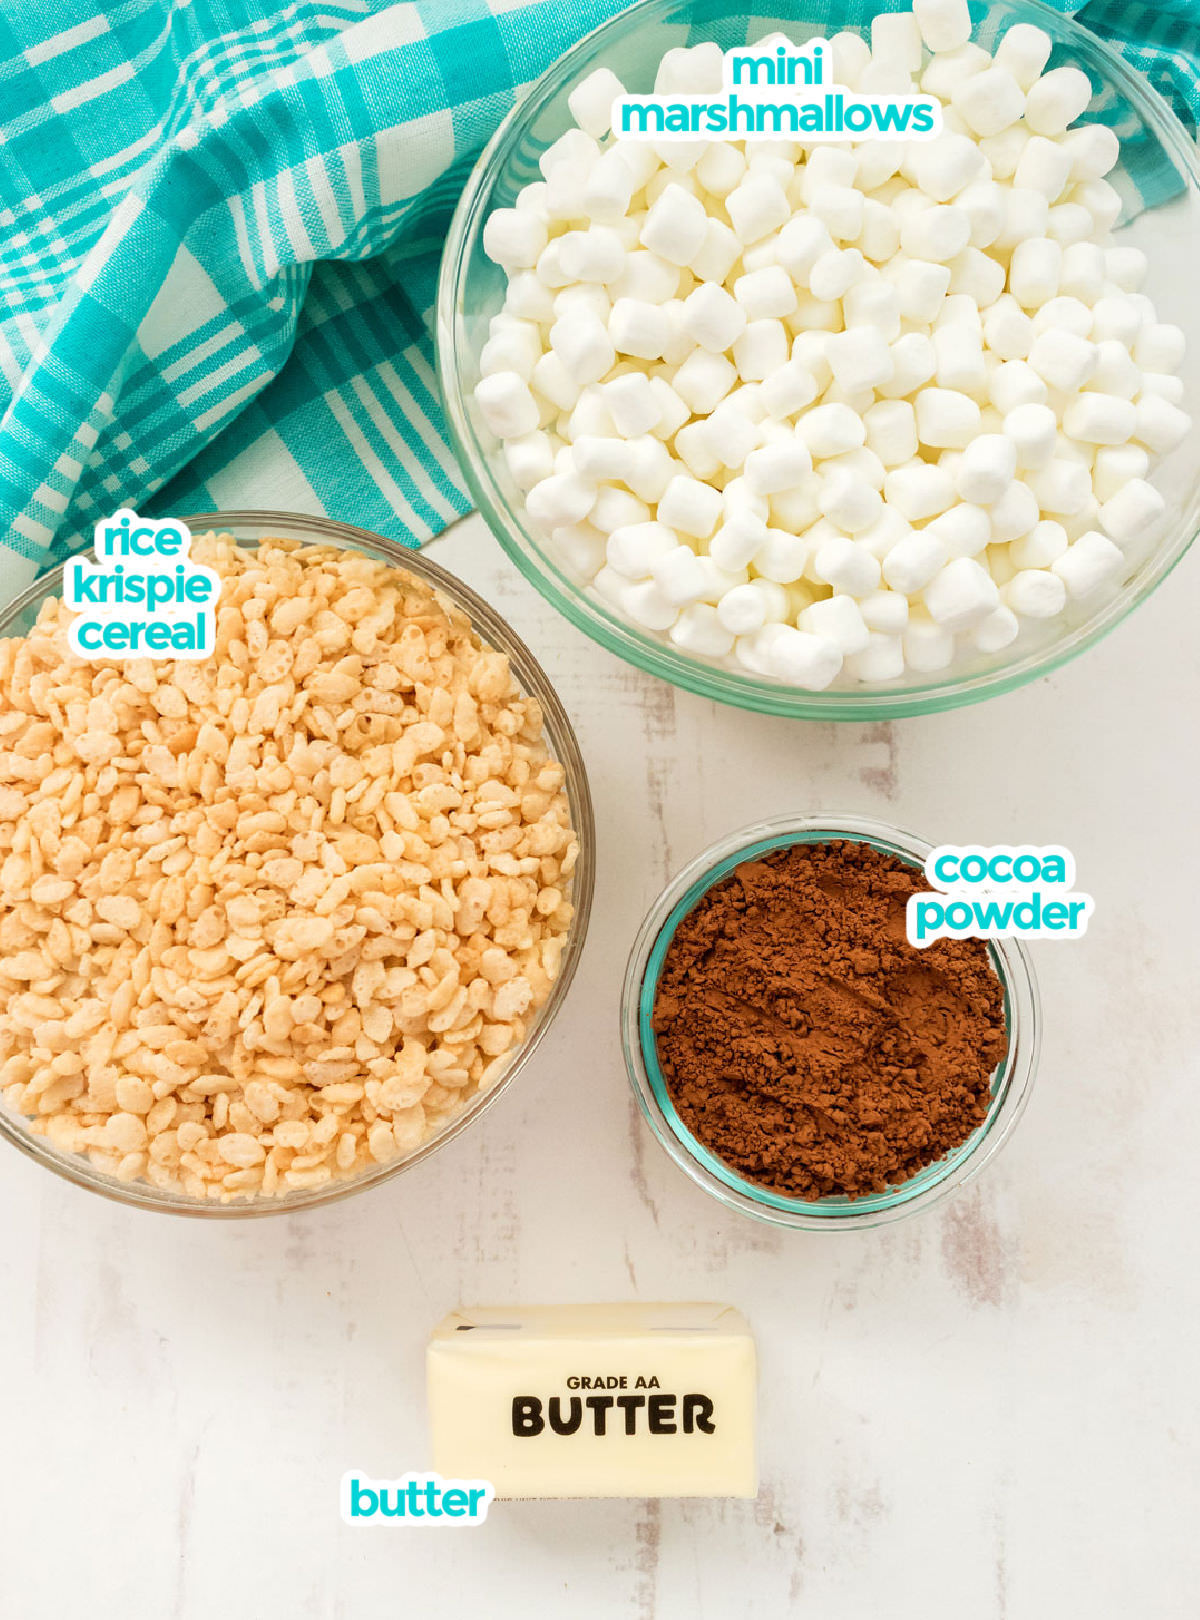 All the ingredients you will need to make Chocolate Rice Krispie Treats including Mini Marshmallows, Rice Krispie Cereal, Butter and Cocoa Powder.